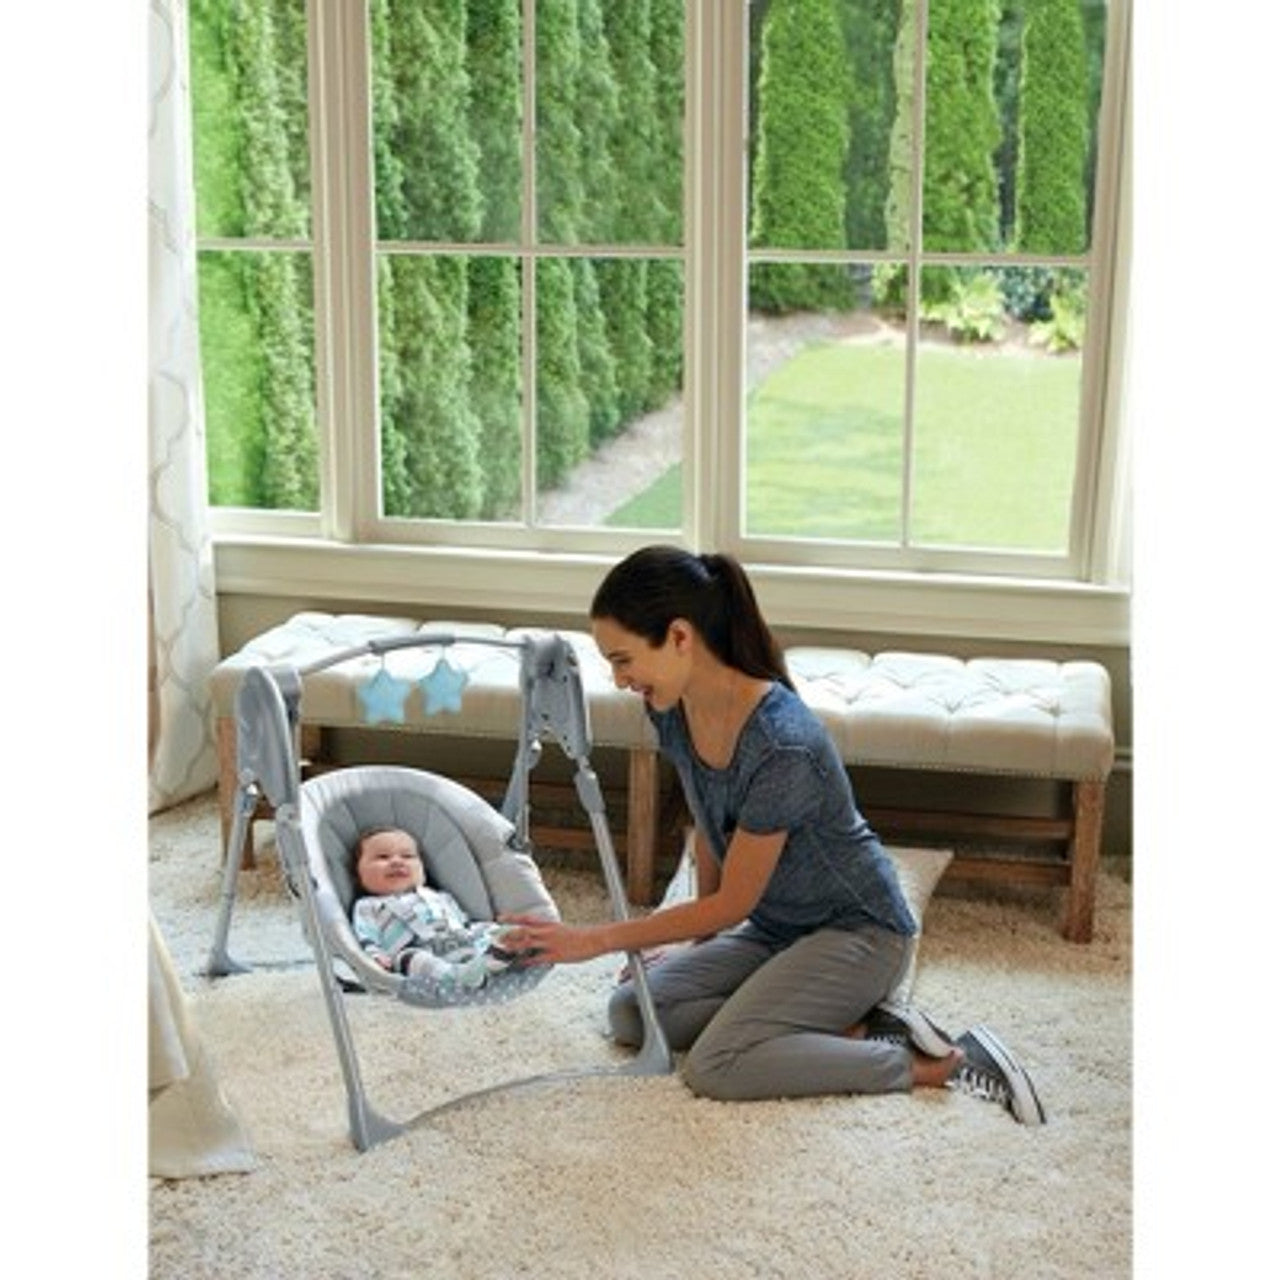 New - Graco Slim Spaces Compact Baby Swing - Humphry